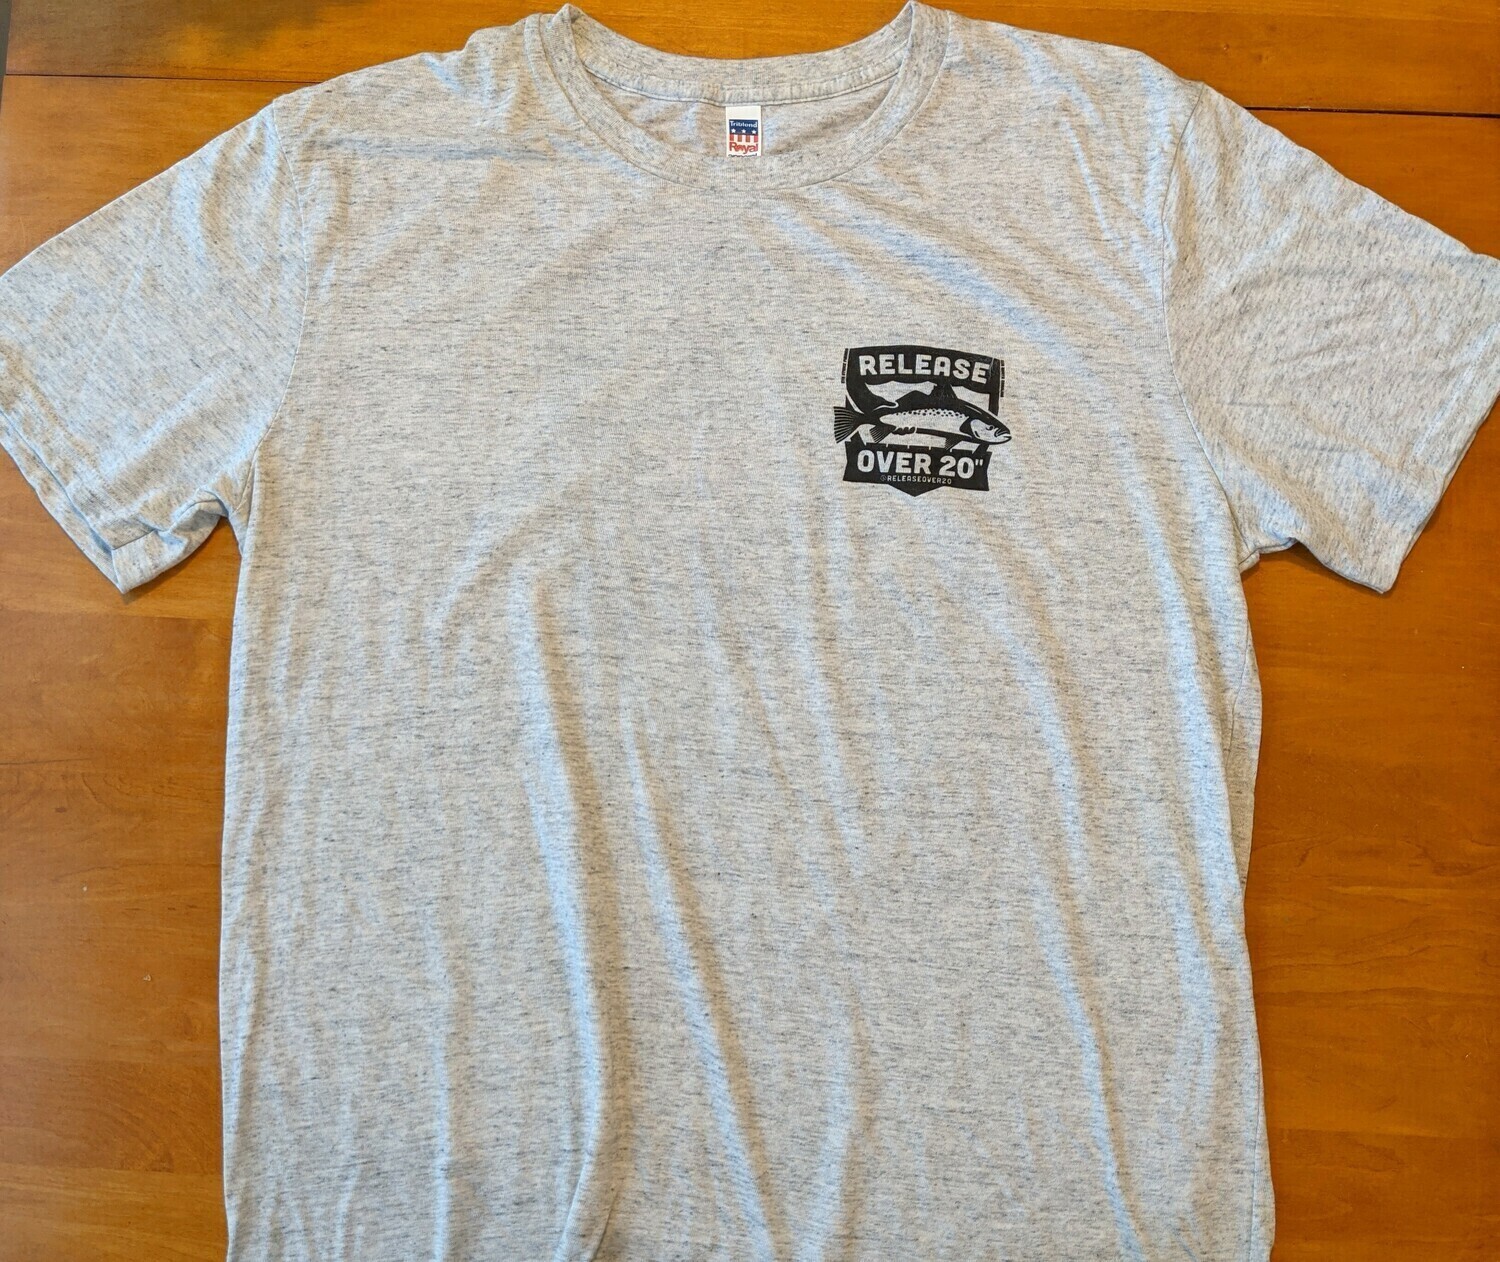 Release Over 20 Tri-Blend Tee - Size 3XL